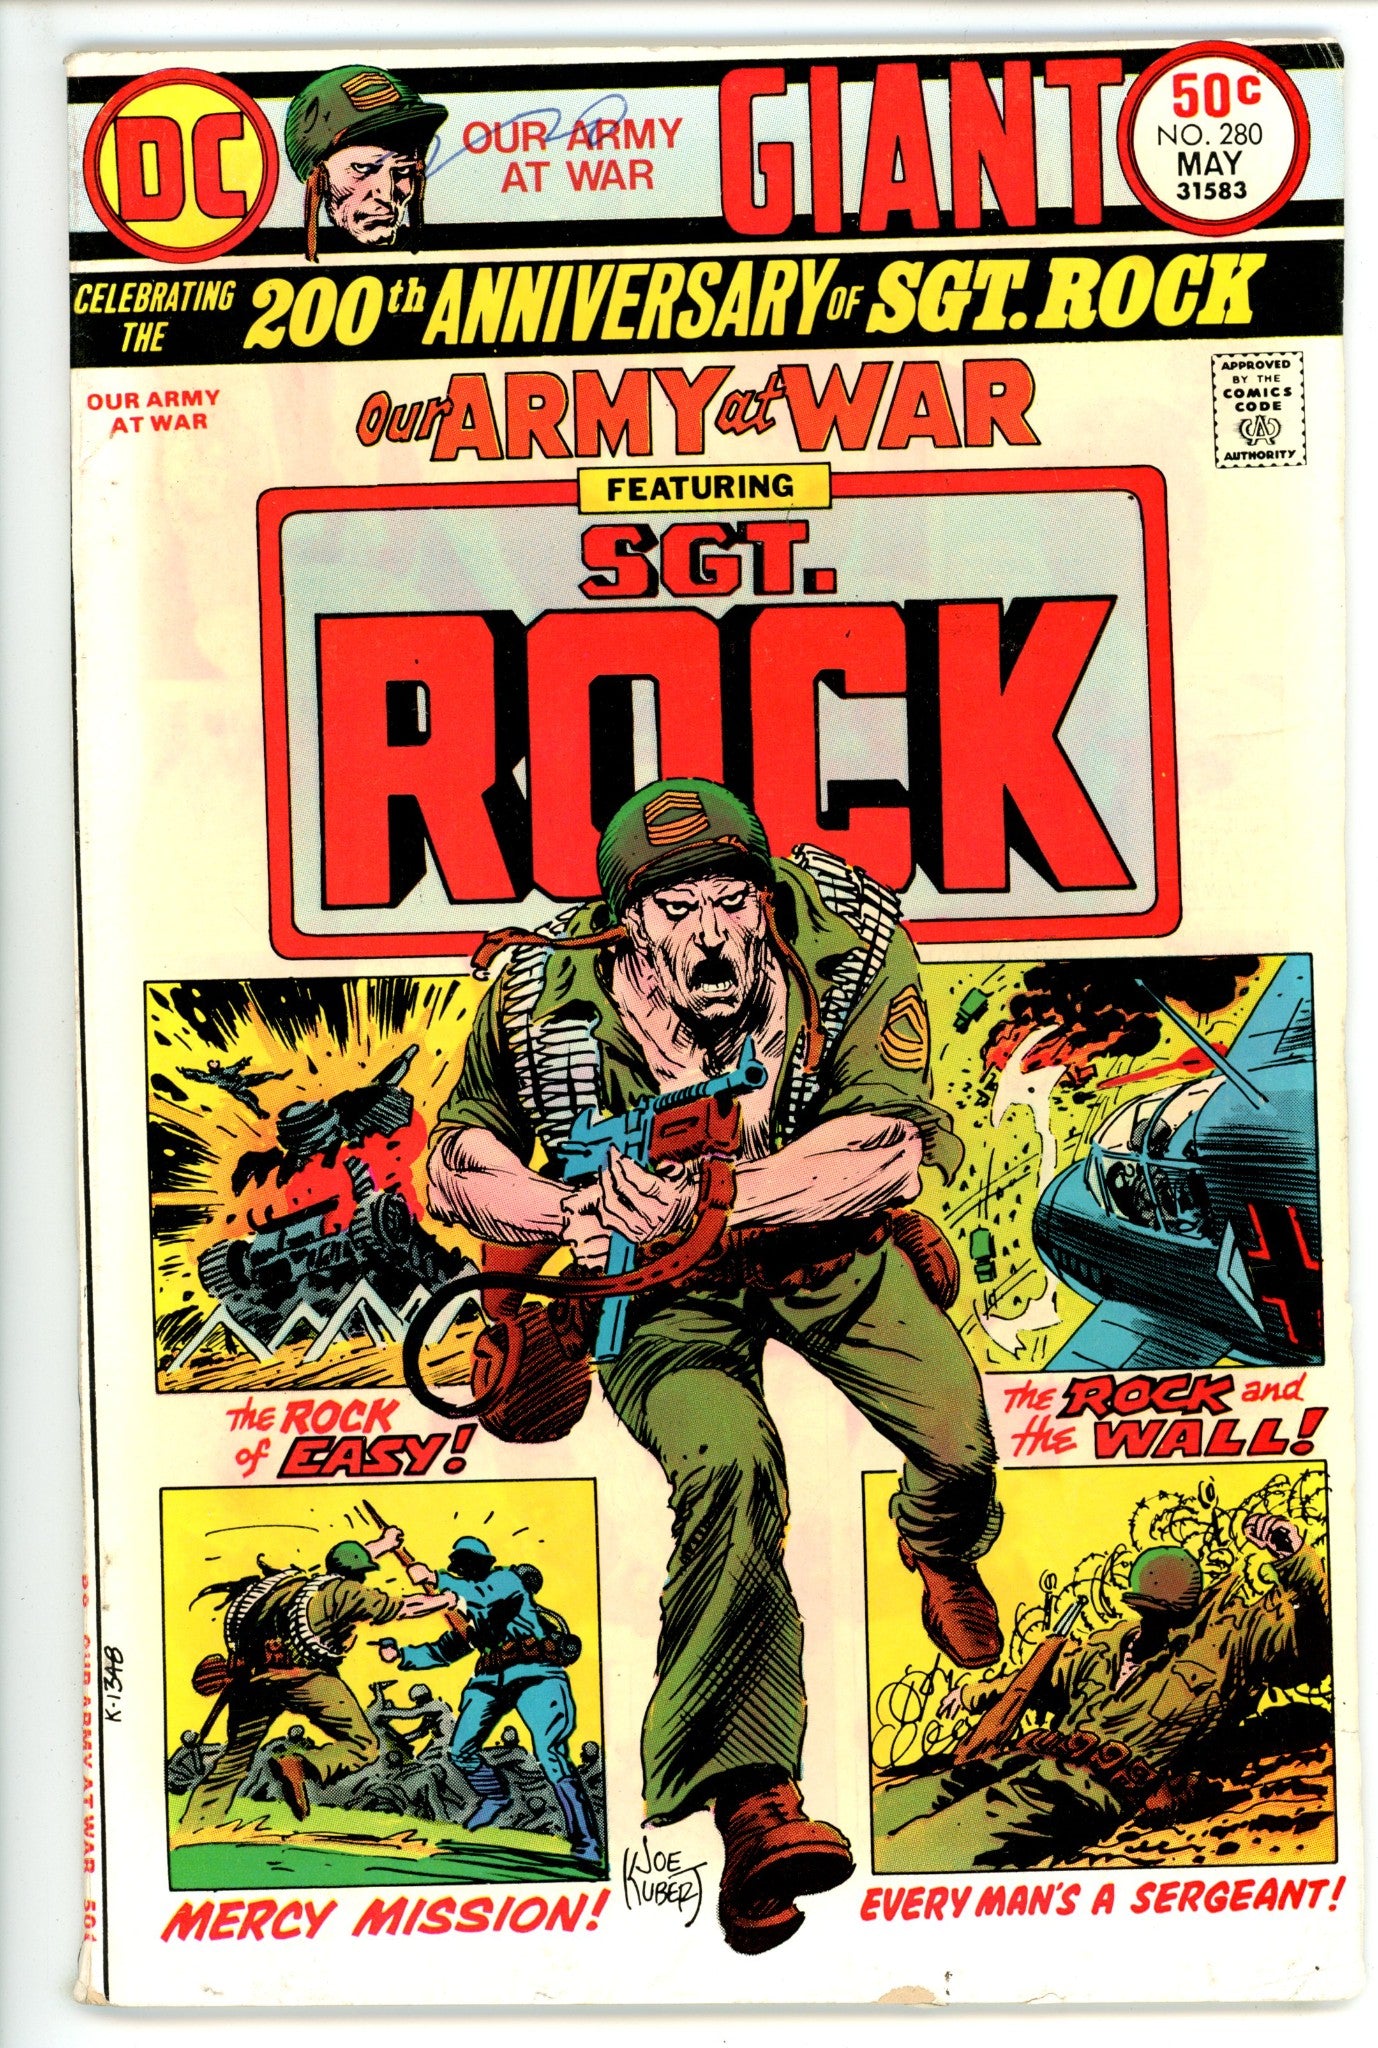 Our Army at War Vol 1 280 FN (6.0) (1975) 